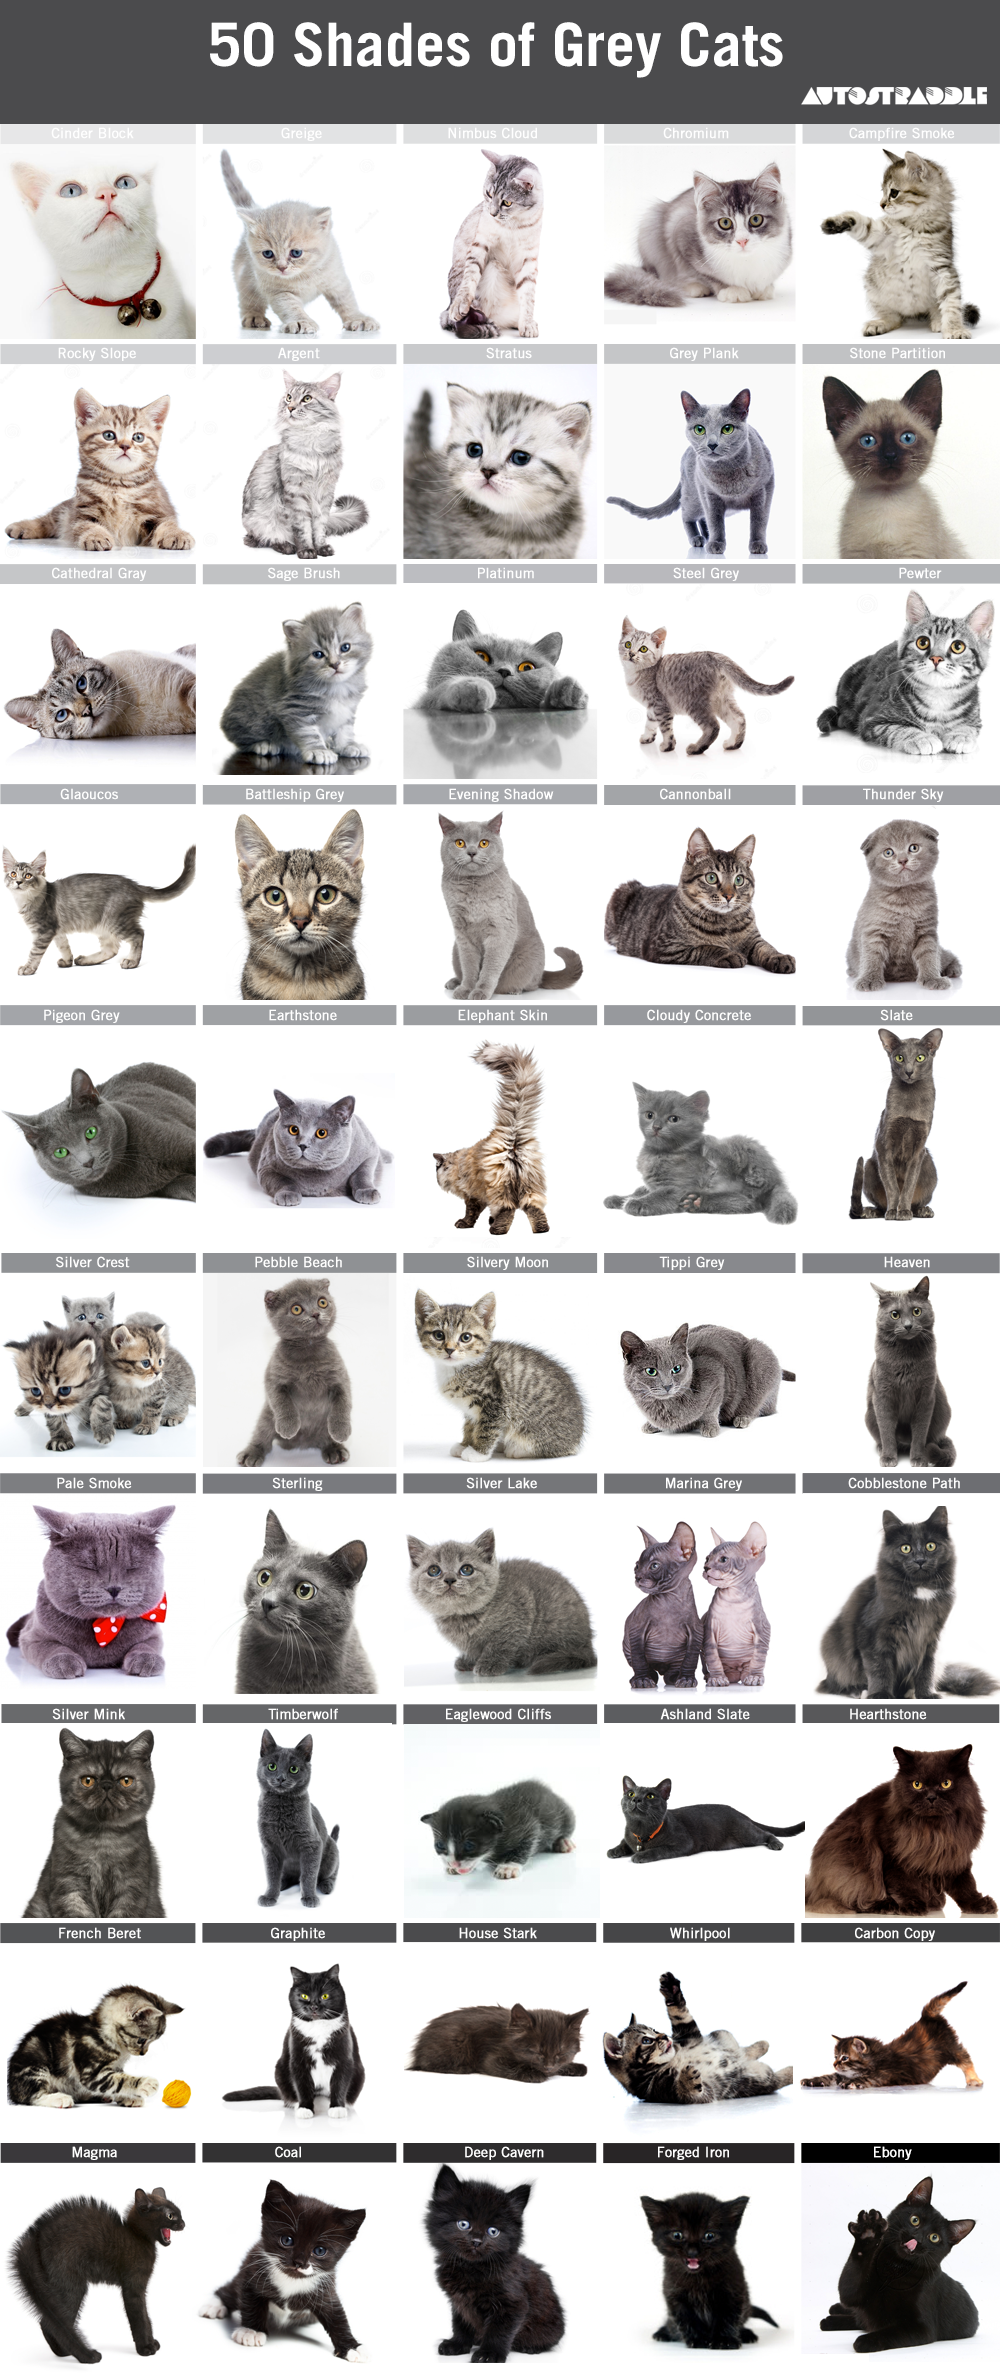 50-shades-grey-cats-autostraddle-4